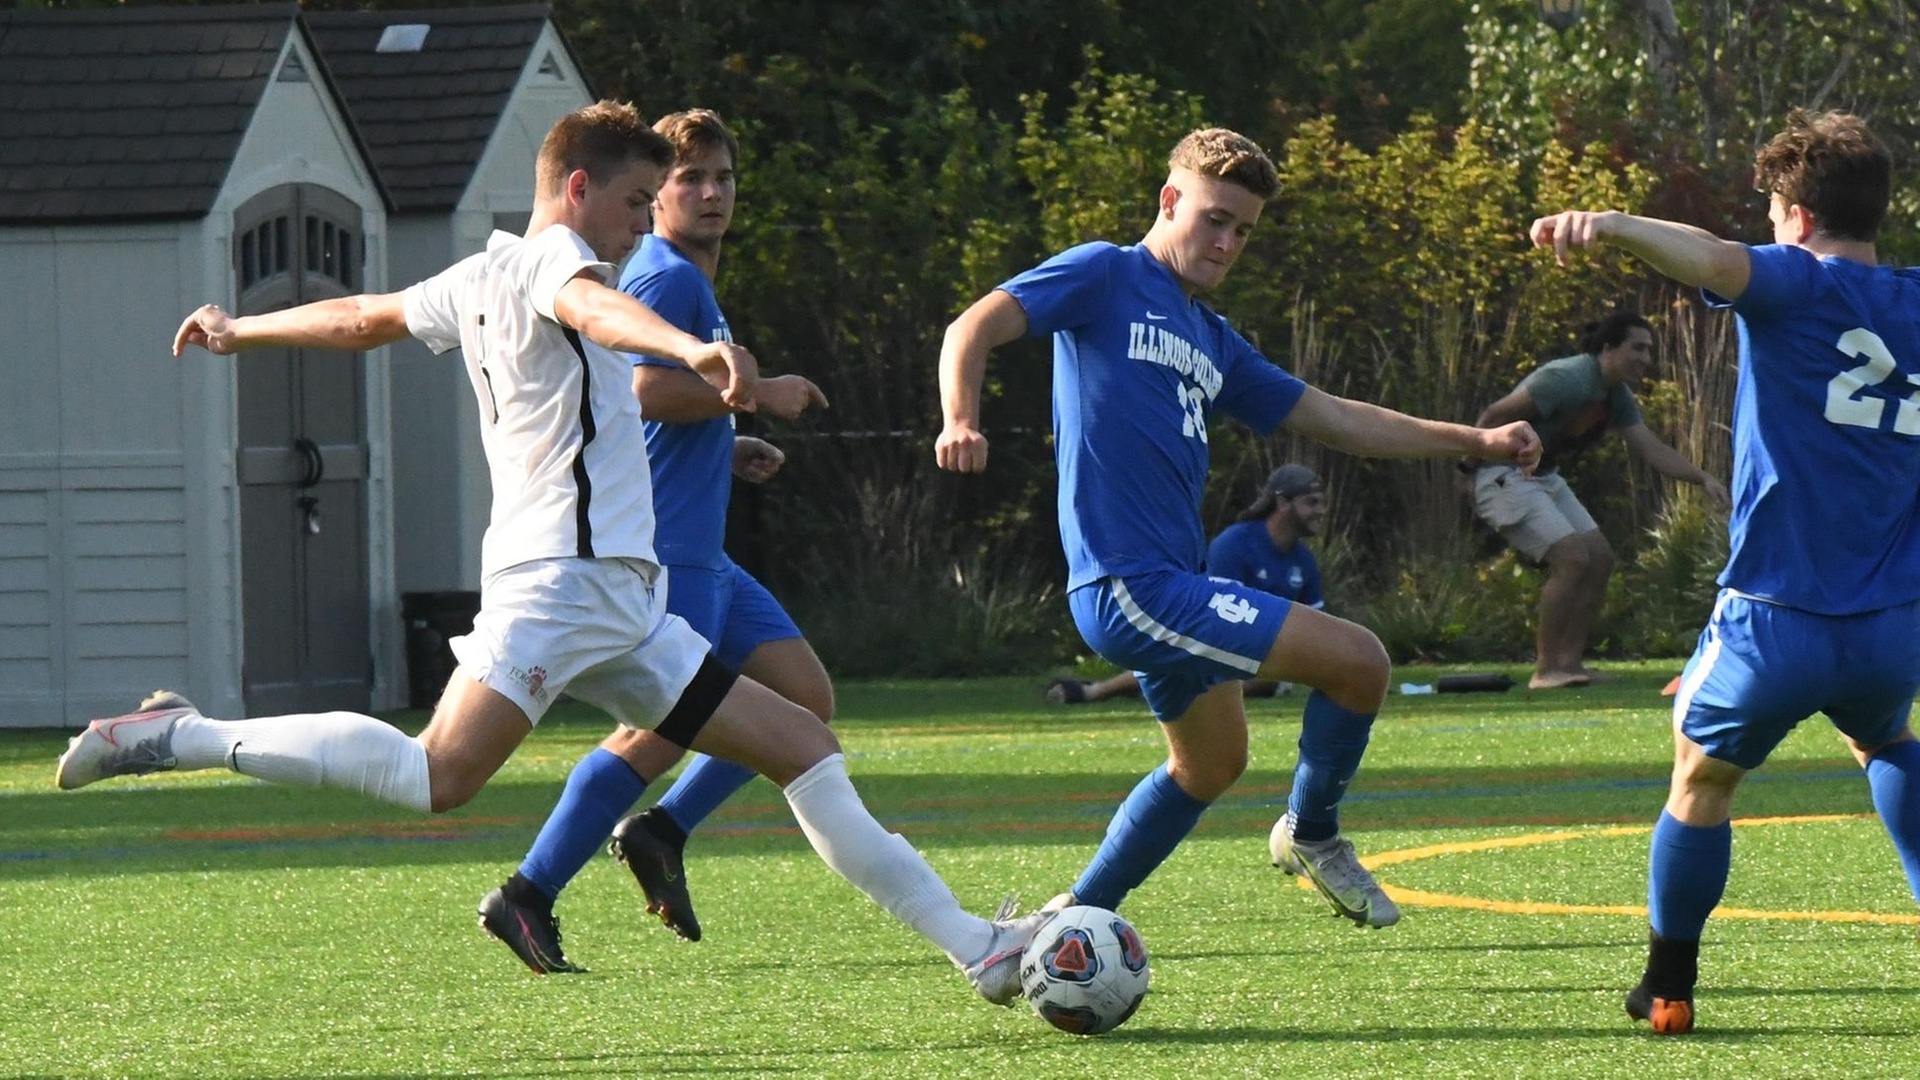 Lake Forest Holds Off Illinois College to Win 2-1